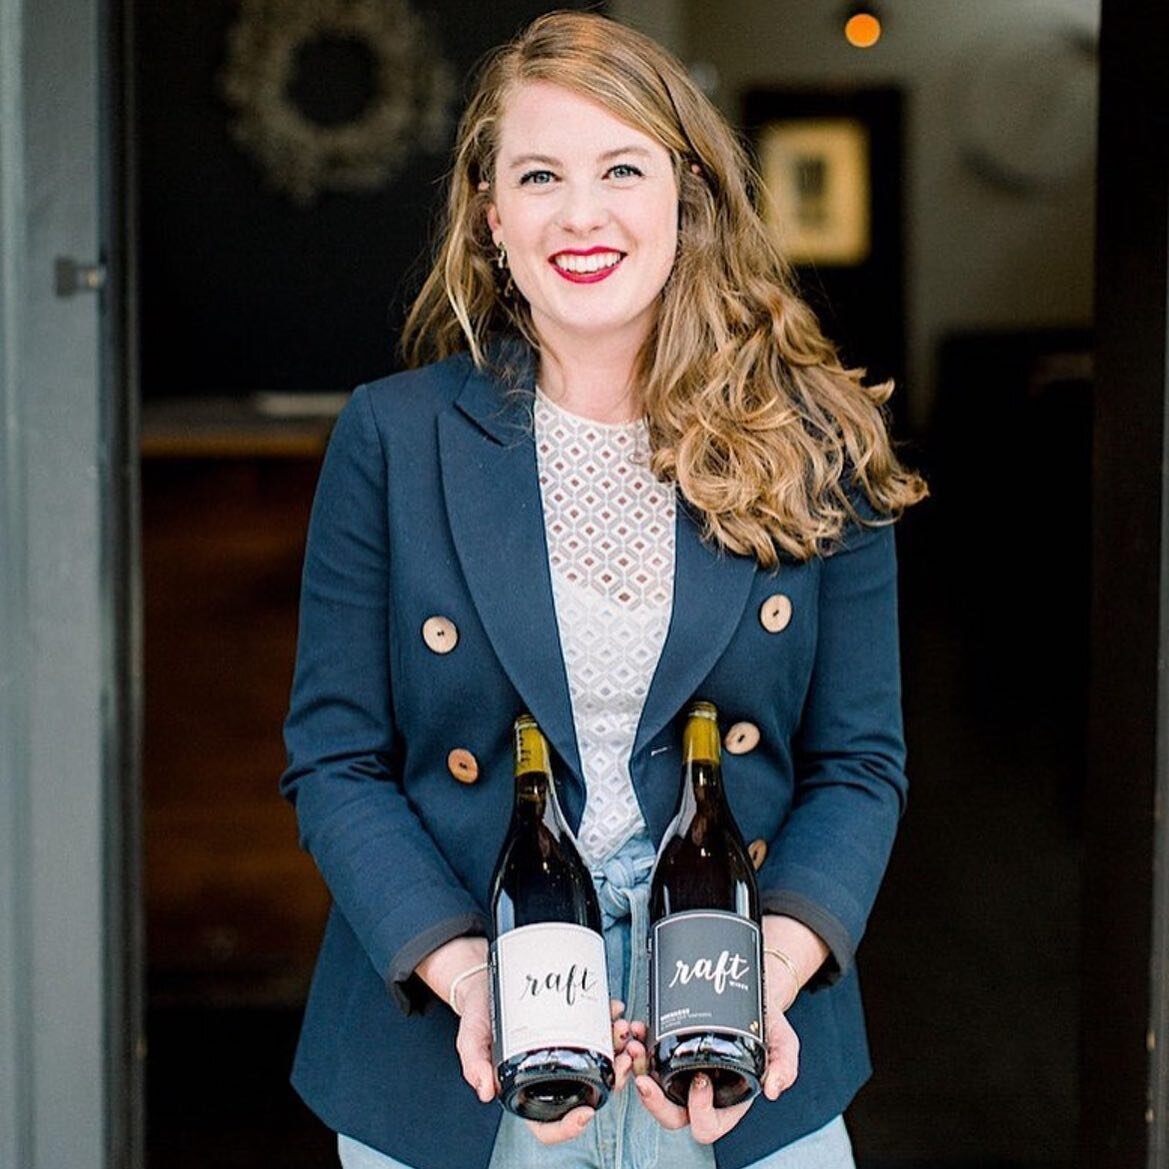 Our next Cookbook Club is coming up next week! We can't wait to welcome author Jennifer Reichardt @duckdaughterjj and her book The Whole Duck as well as her wine label @raftwines!

Members, check your email for the ticket link and details. We only ha